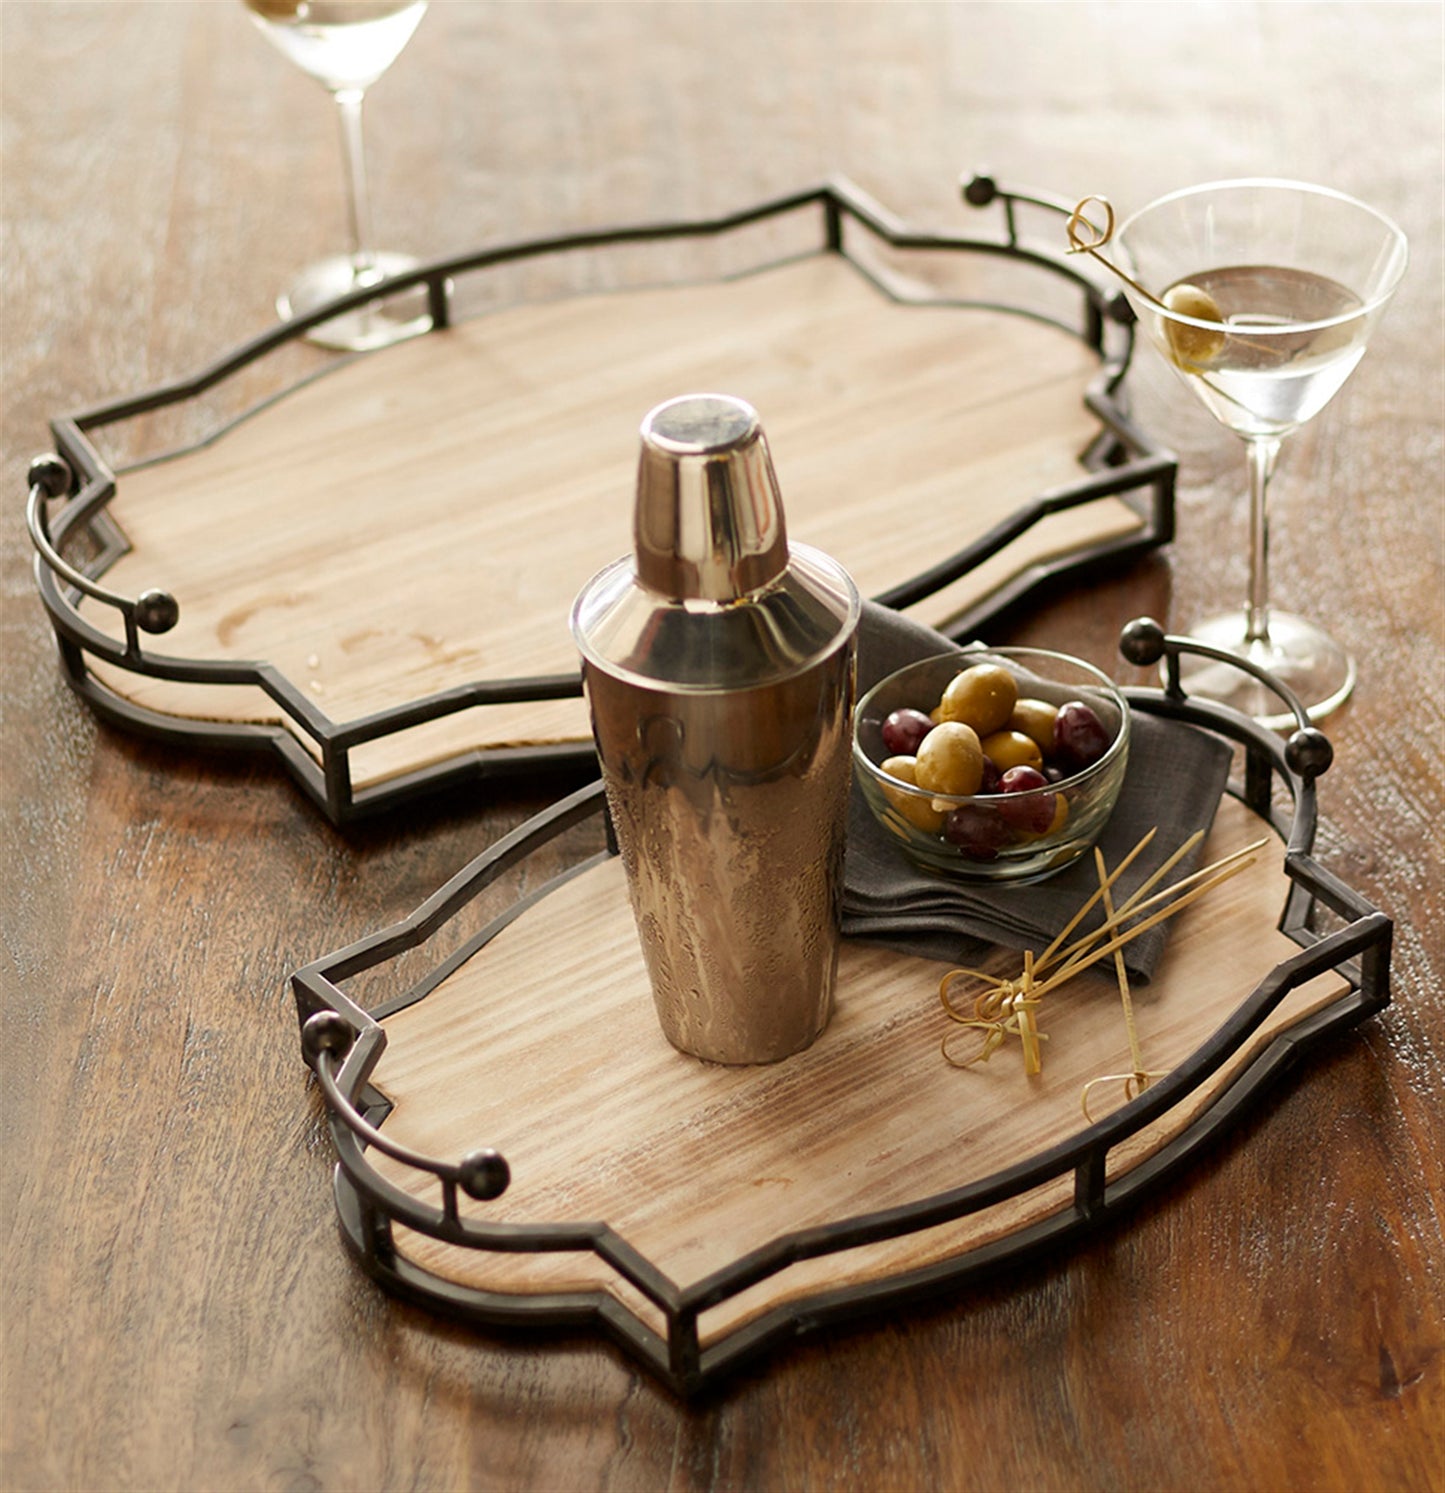 Decorative trays with  natural wooden composition paired with the traditional metal handle design